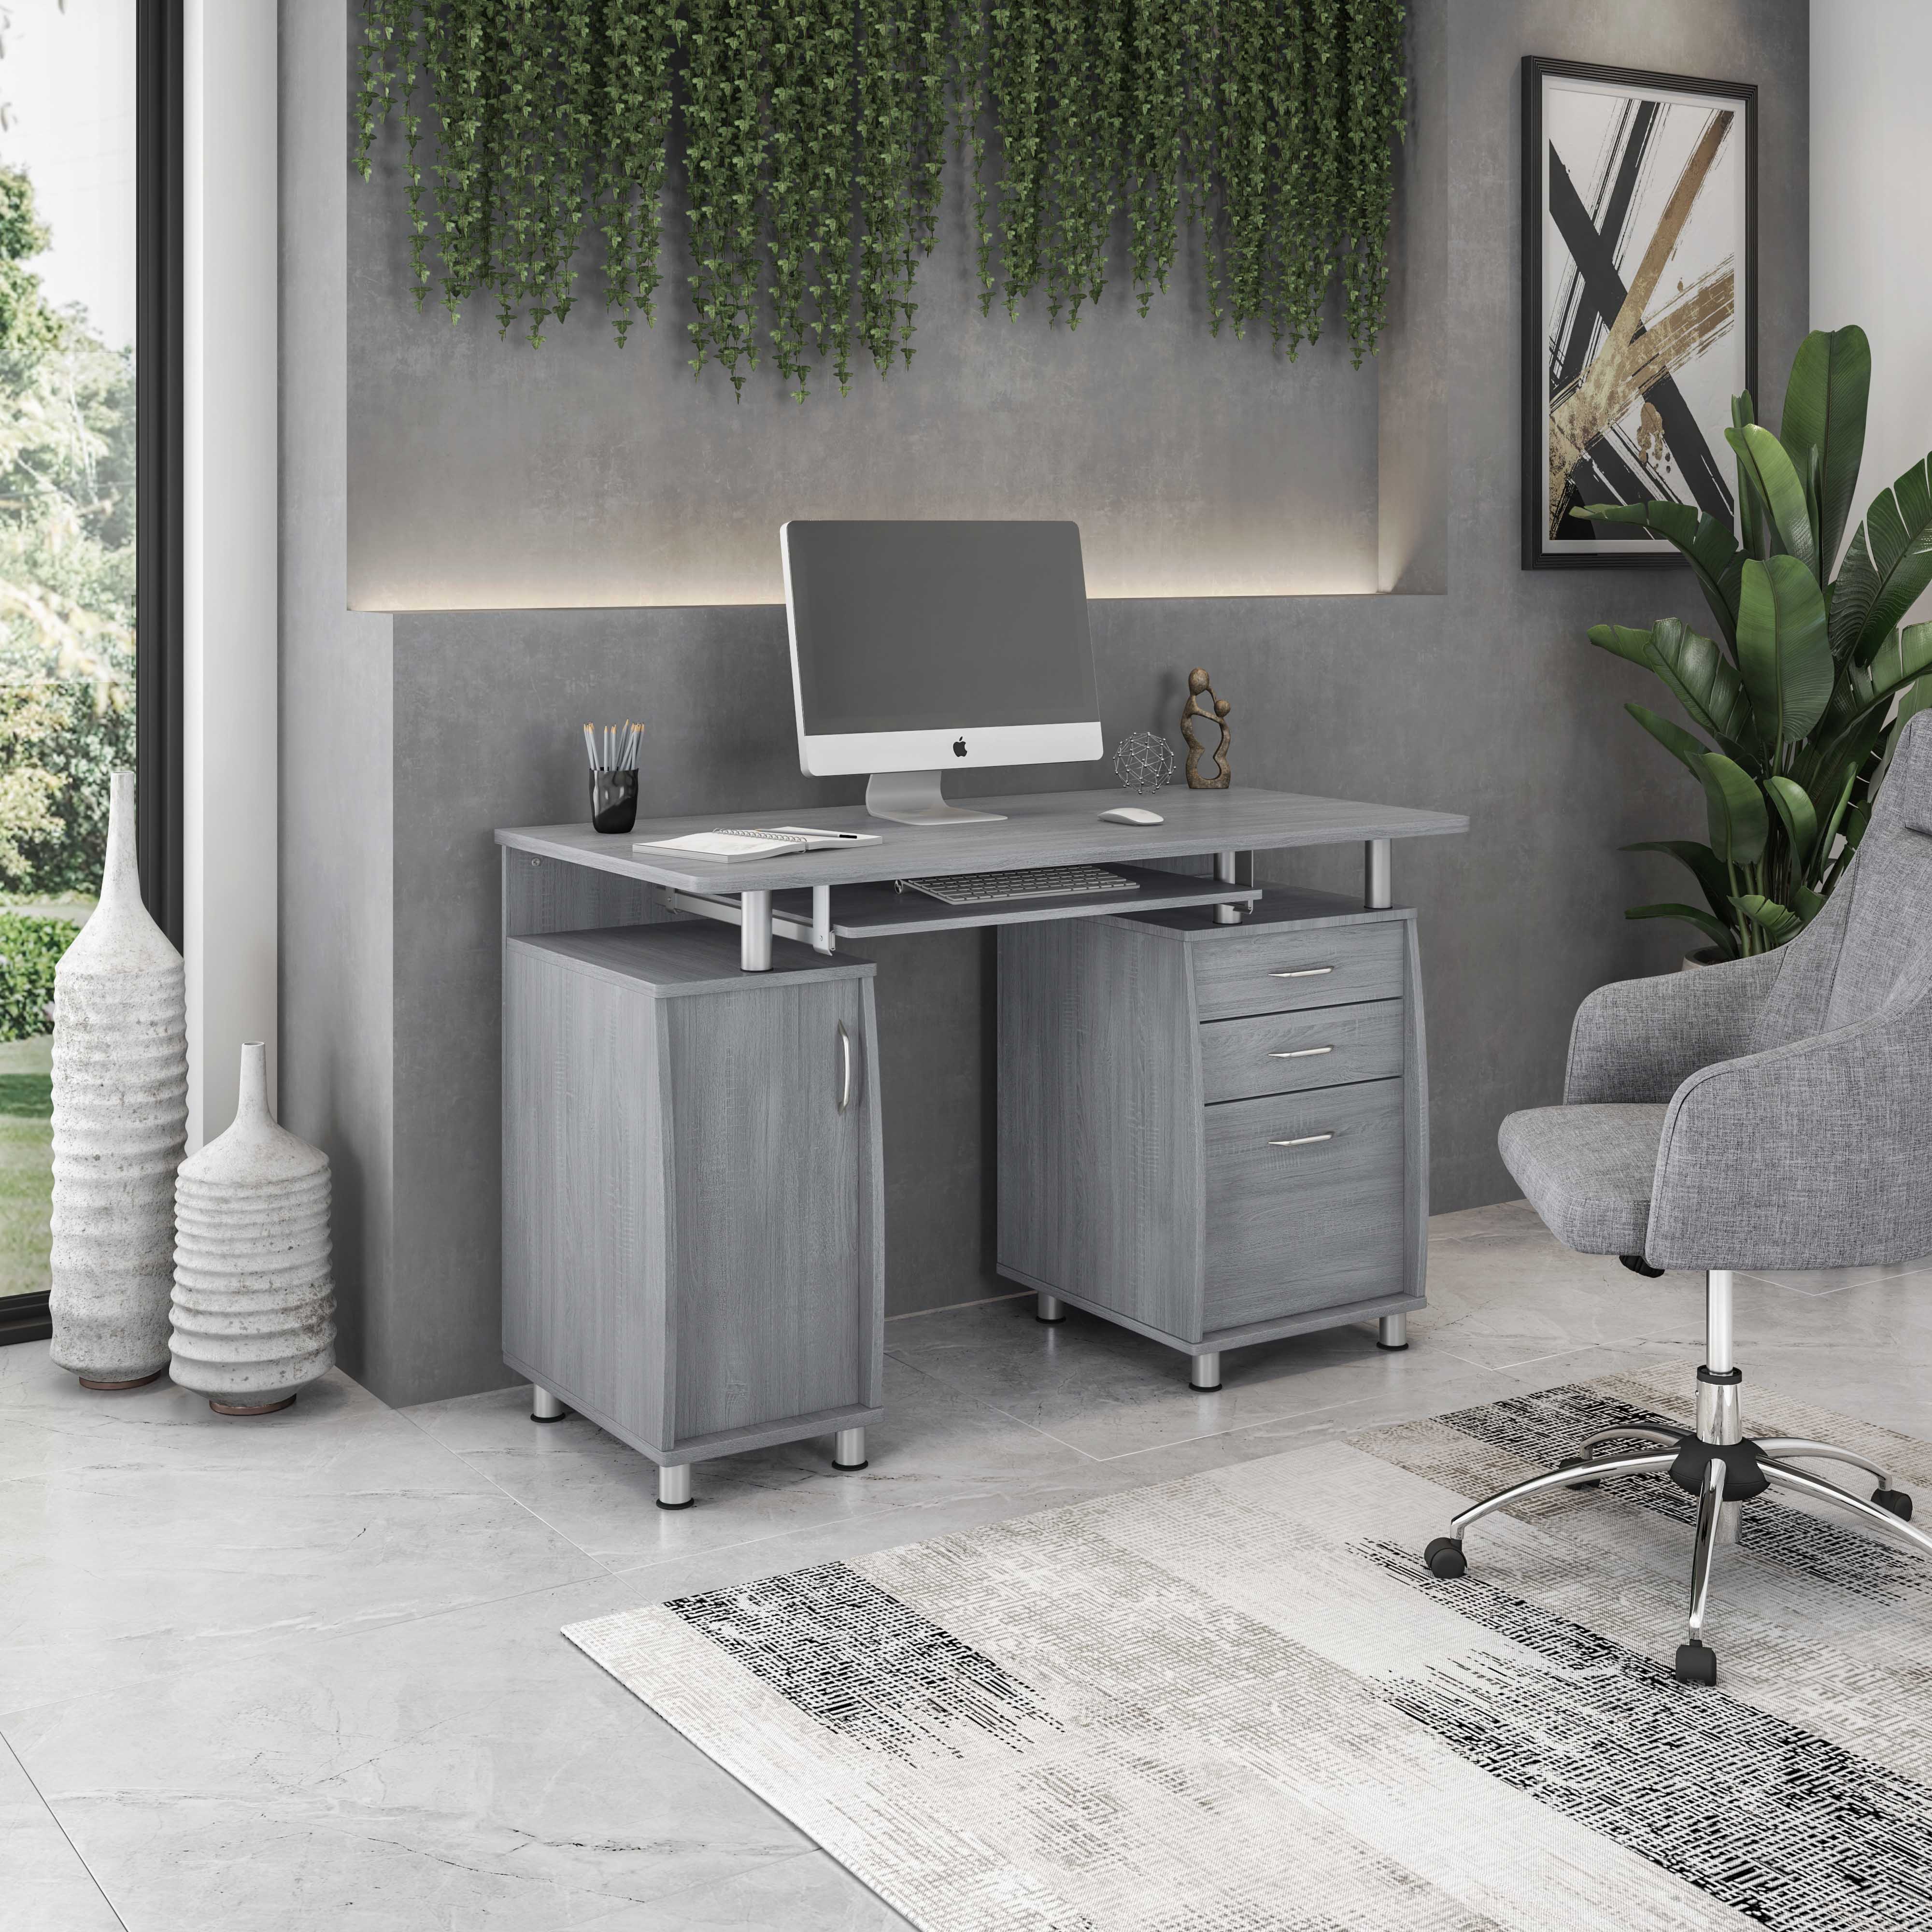 Techni Mobili White and Gold Desk for Office with Drawers & Storage